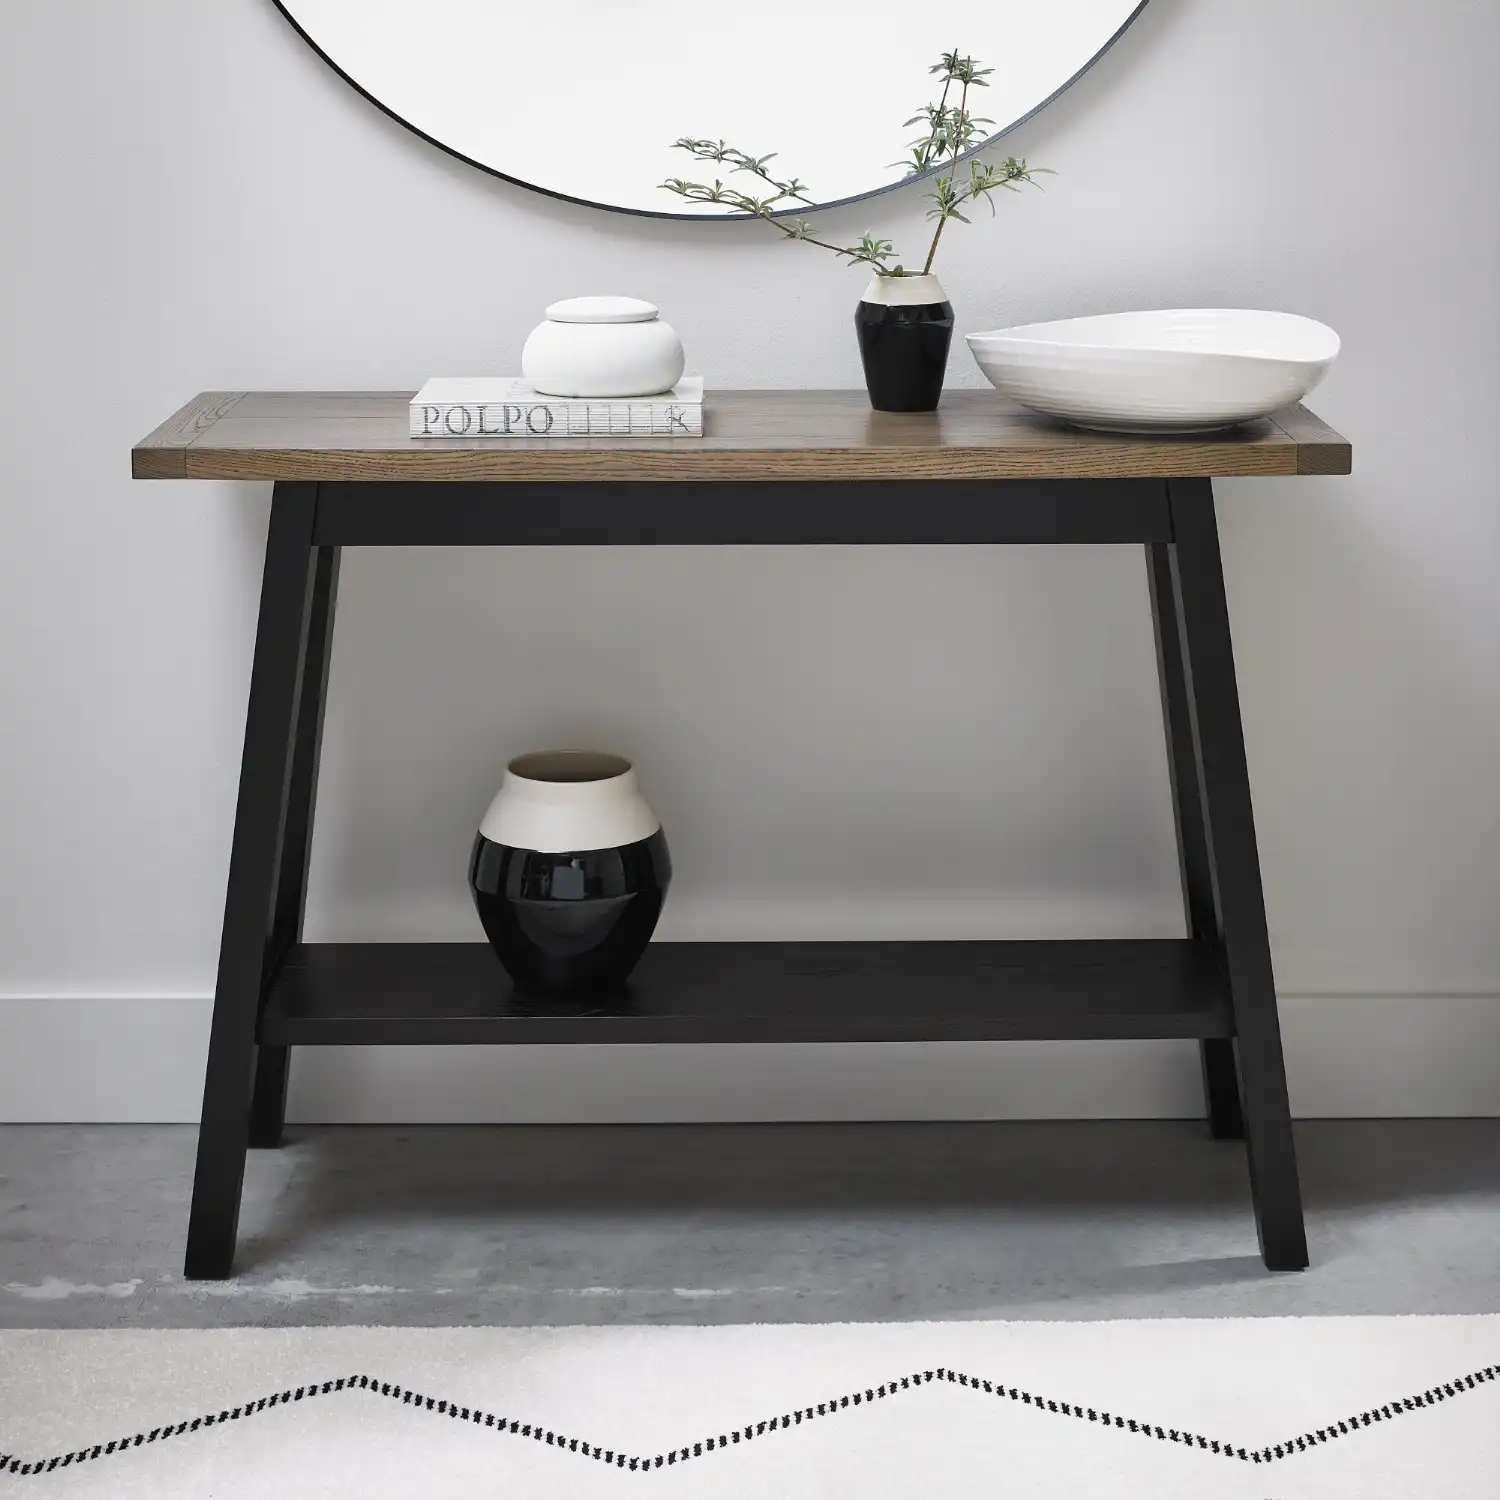 Weathered Oak Console Table with Shelf Black Peppercorn Base